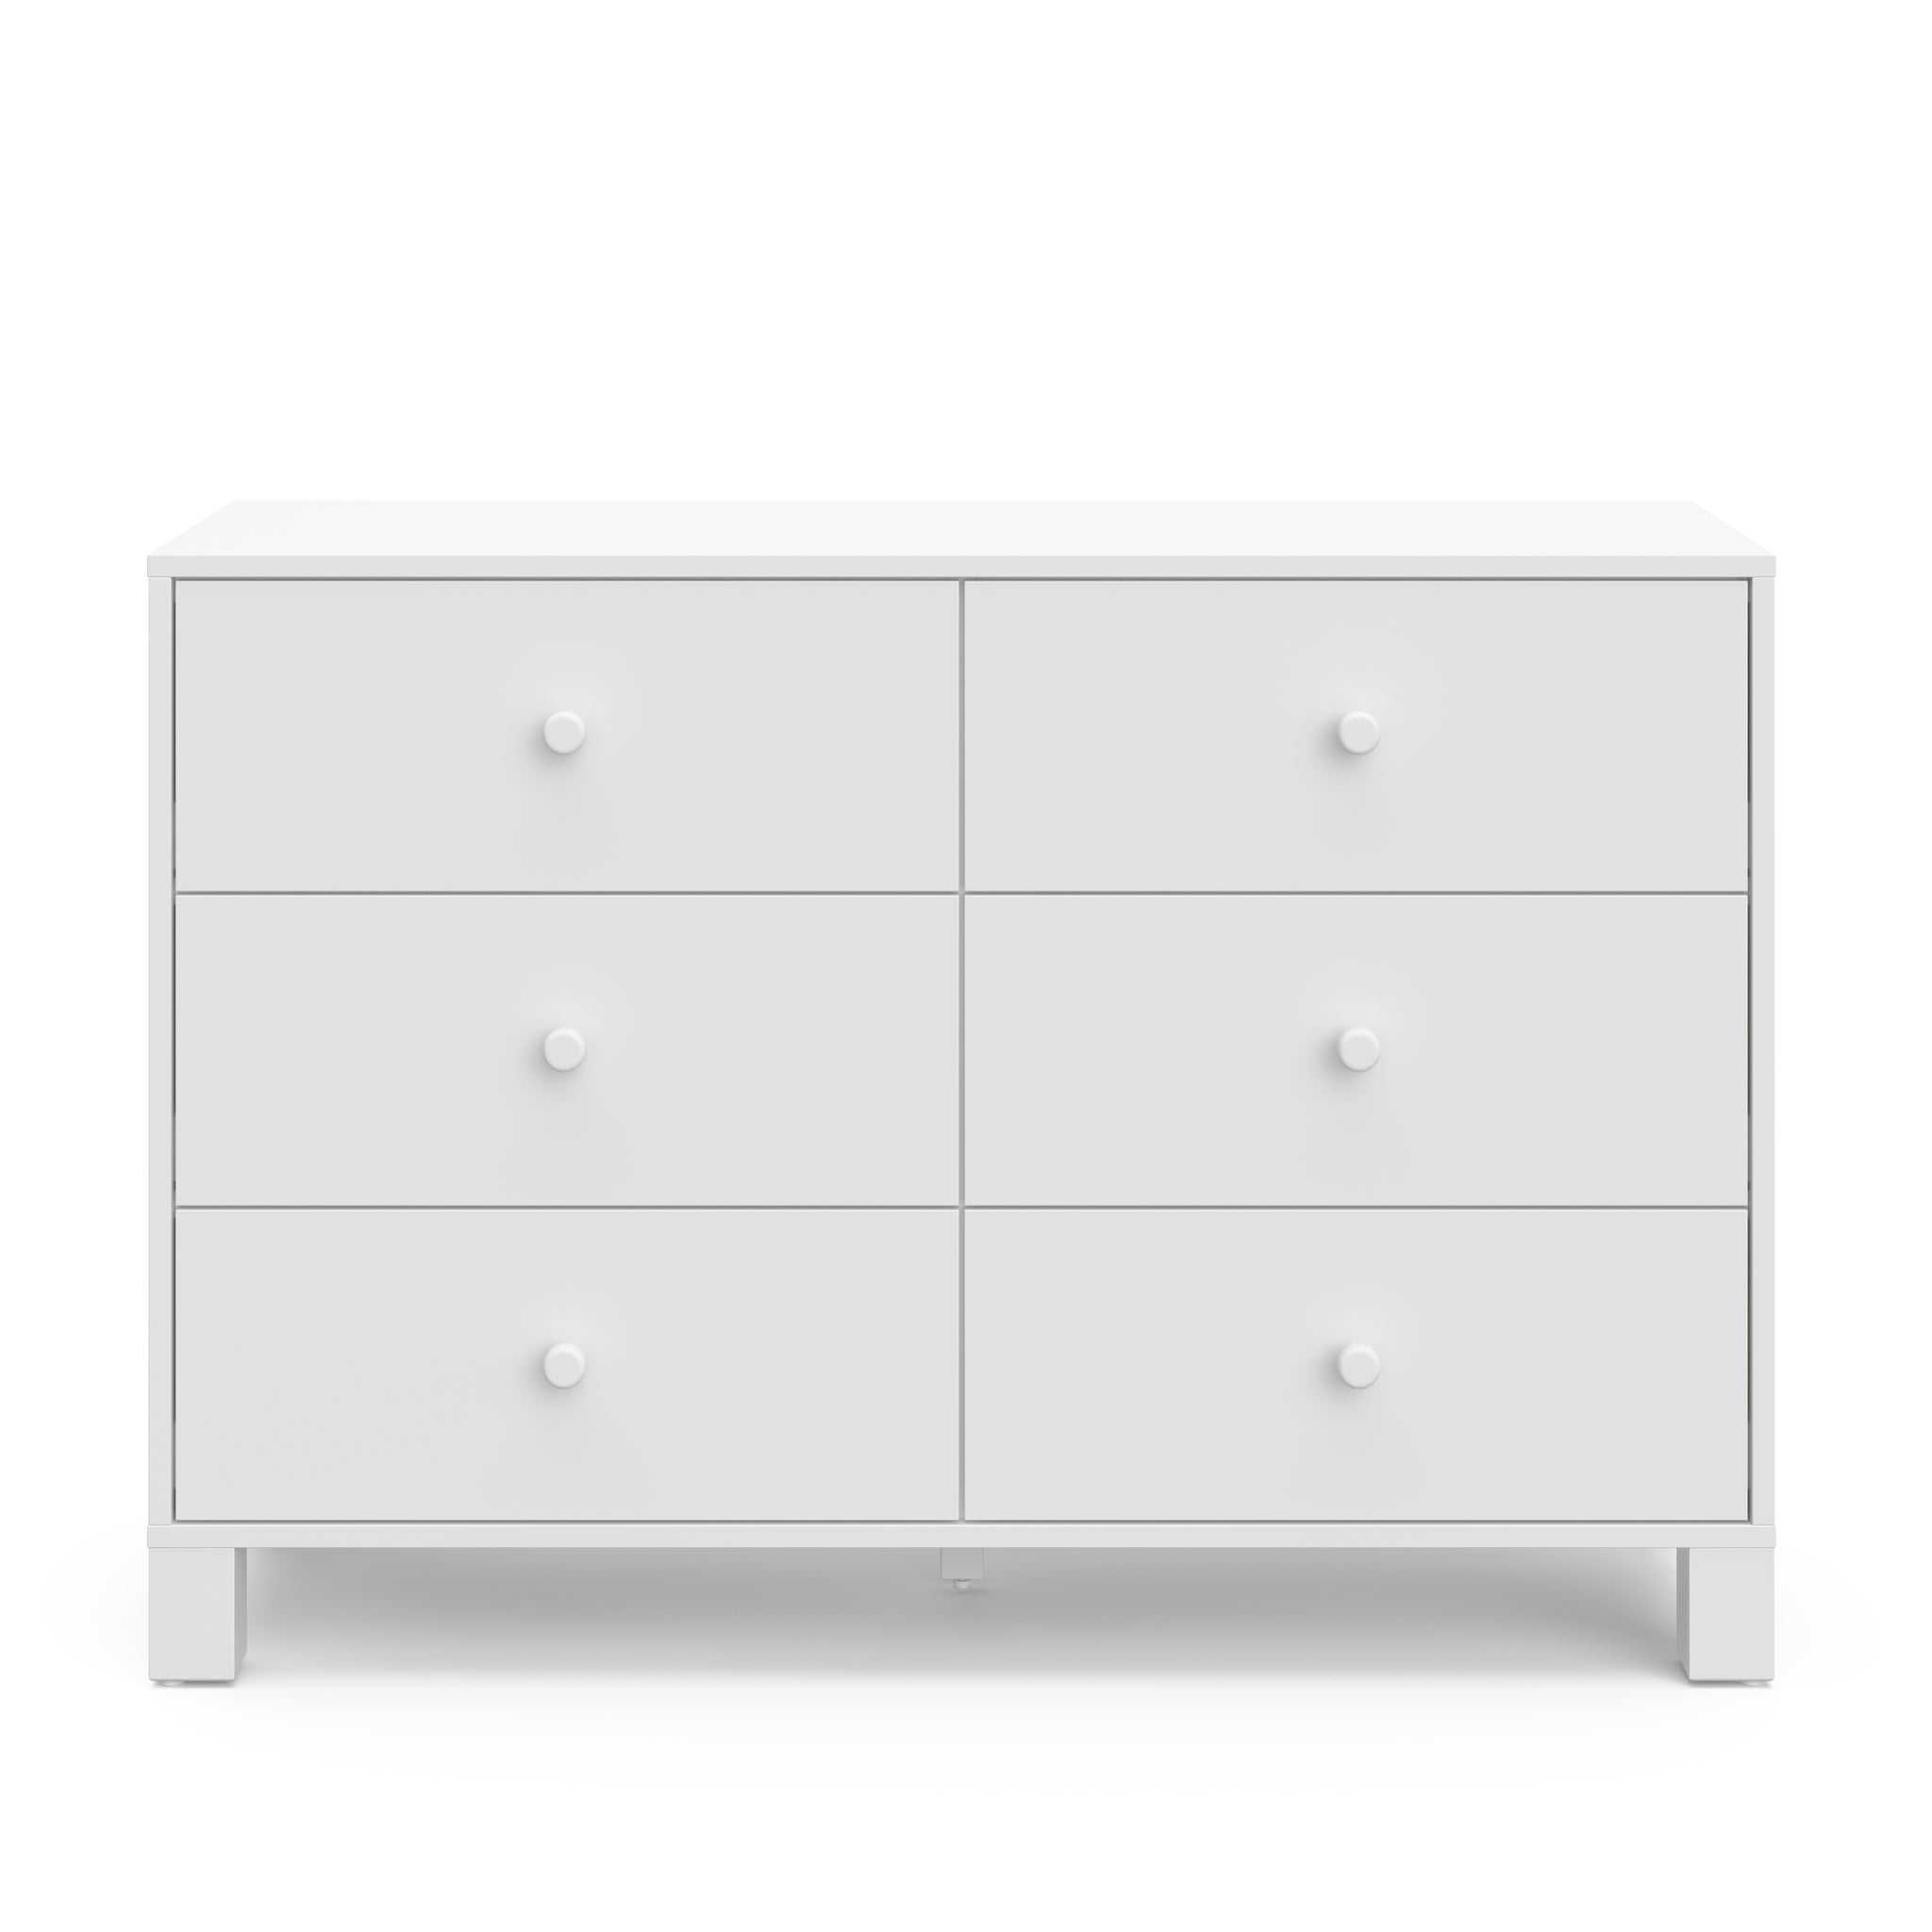 front view of white 6 drawer dreser